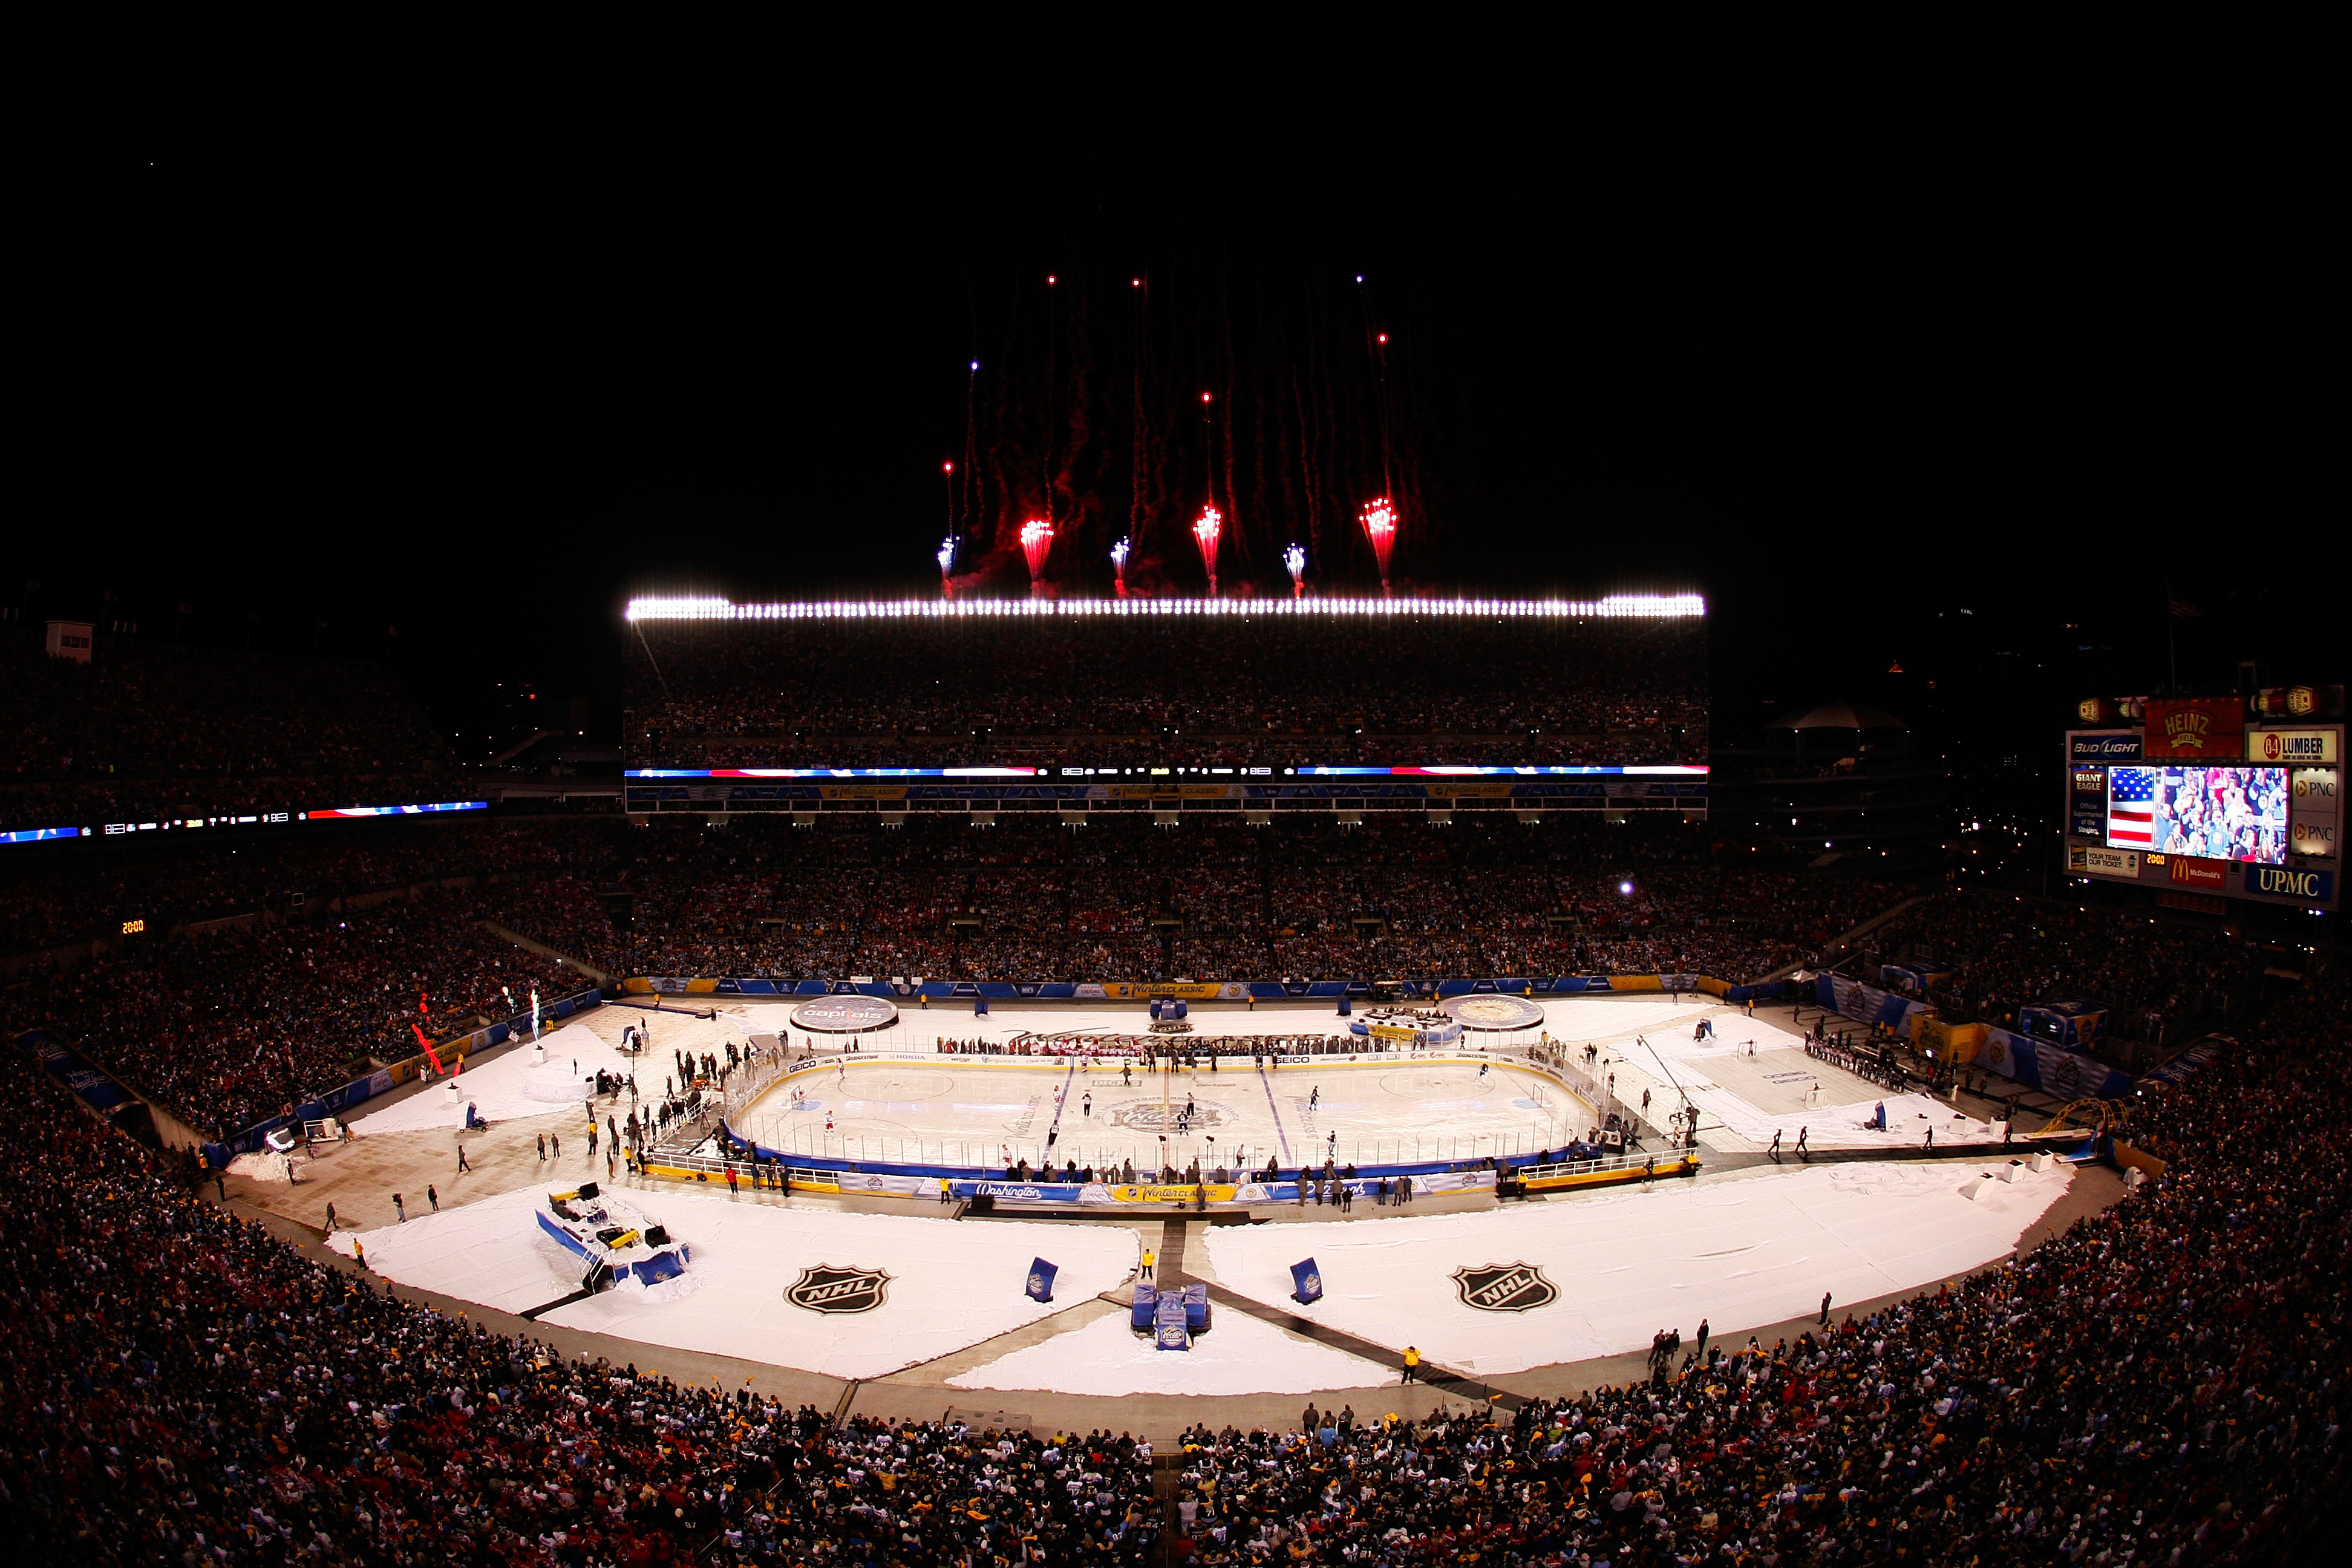 NHL Winter Classic 2011: 7 Things You May Not Have Seen at the